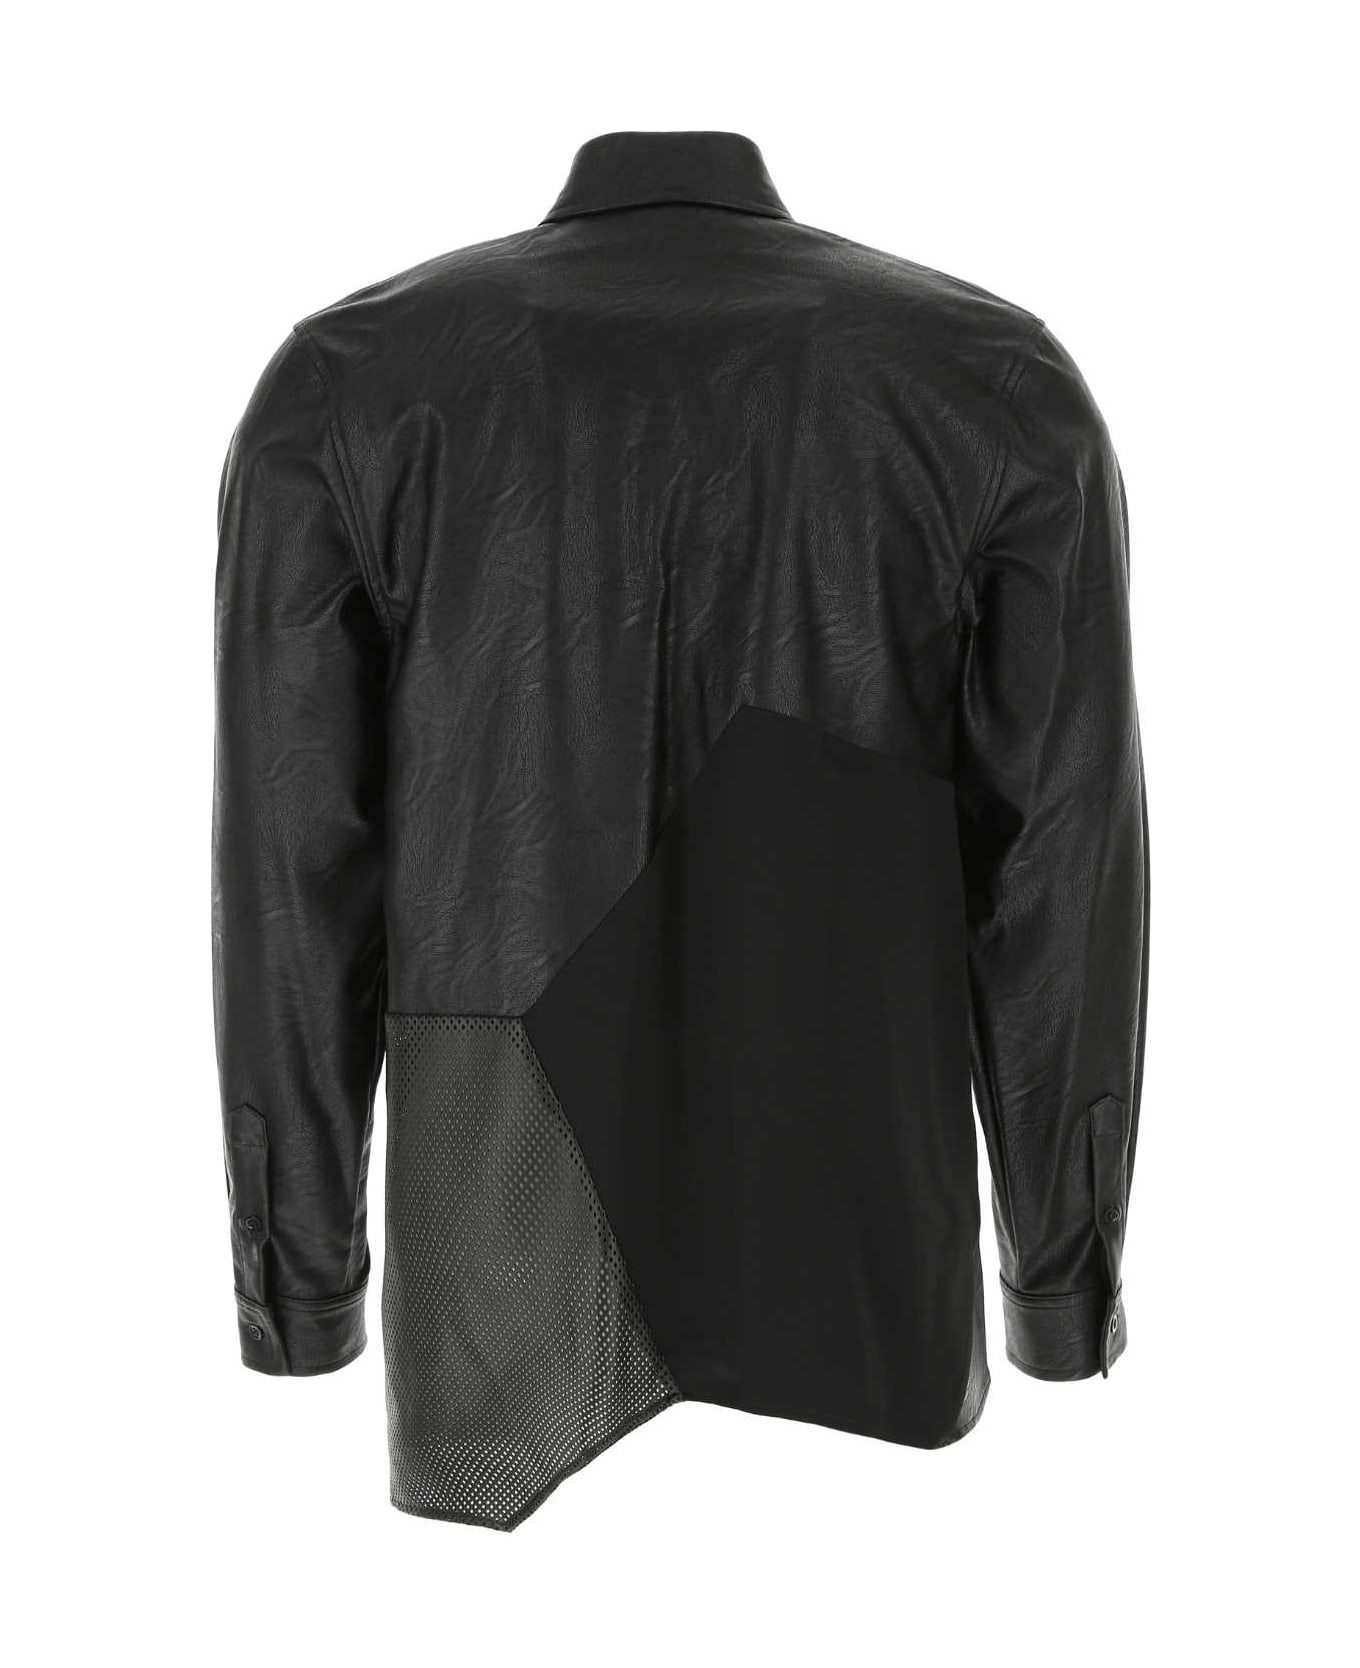 Koché Black Synthetic Leather And Satin Shirt - 900